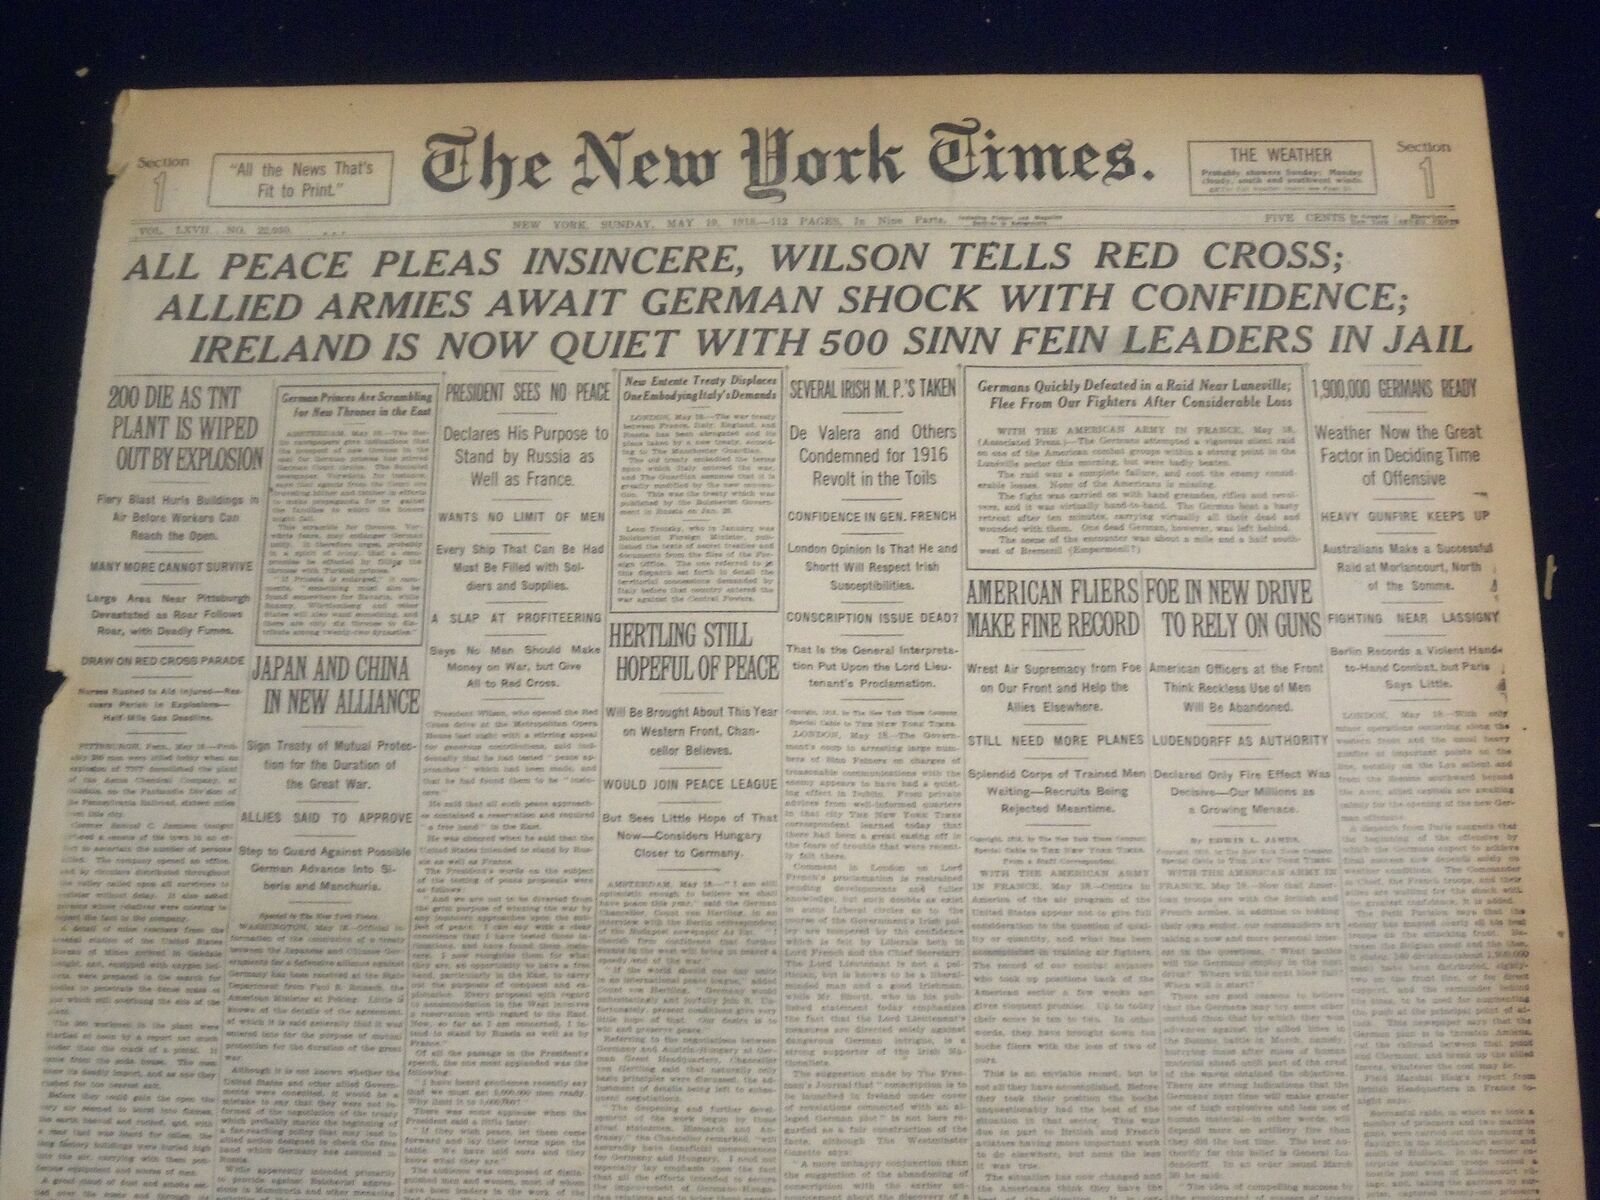 1918 MAY 19 NEW YORK TIMES-PEACE PLANS INSINCERE, WILSON TELLS RED CROSS-NT 8195